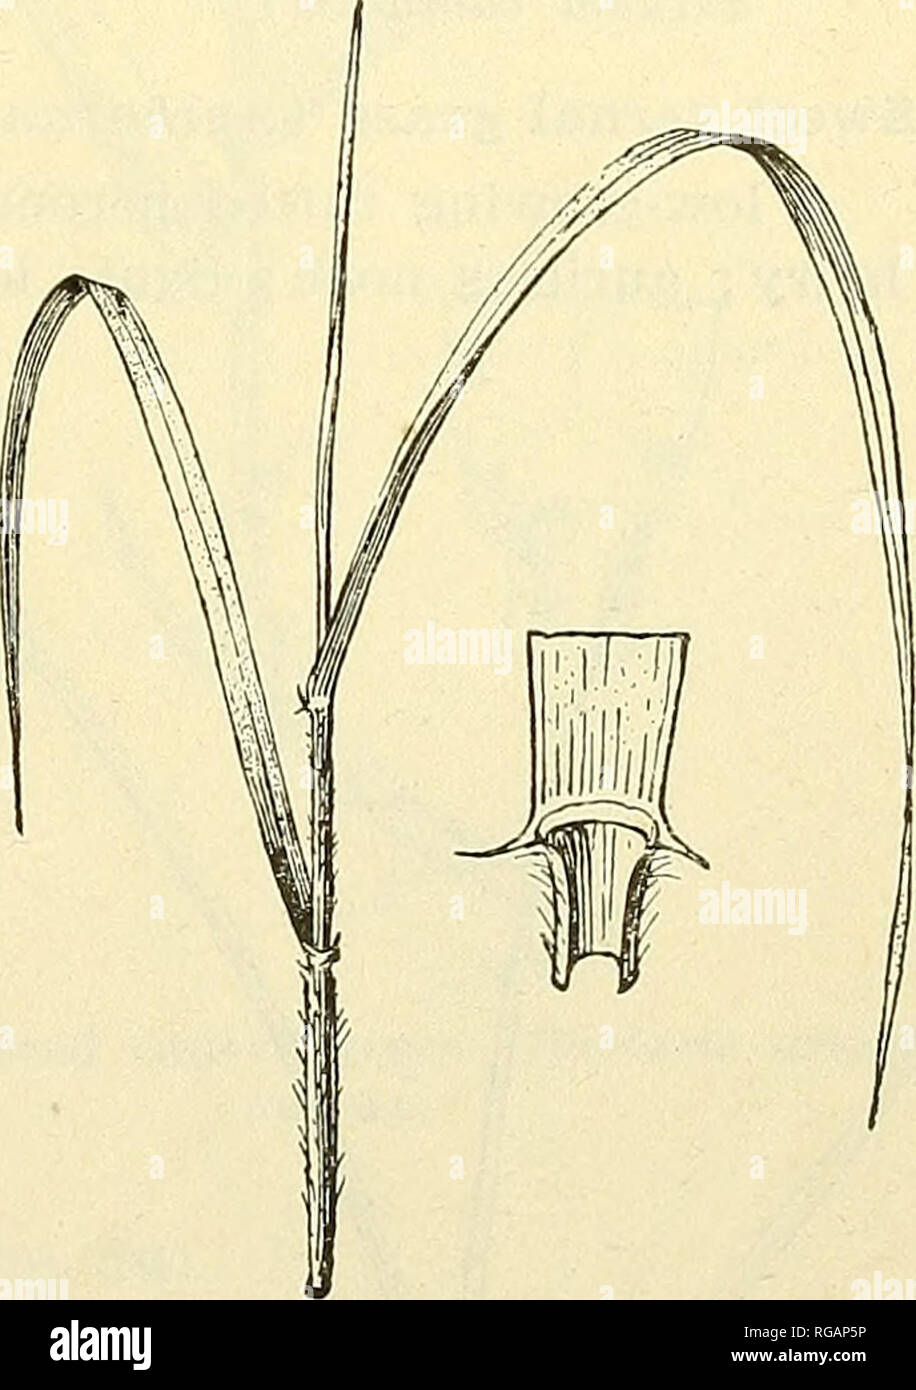 . Bulletin of the U.S. Department of Agriculture. Agriculture; Agriculture. Fig. 21.- -Virginia wild rye (Elymus virginicus). Fig. 22.- -Slender wild rye (Elymus striatus). 17. Virginia wild rye (Elymus virginicus; fig. 21). A loosely tufted perennial; leaves rolled in the bud ; collar broad, glabrous, continuous; auricles short, clawlike; ligule membranous, very short, entire; sheaths not compressed, glabrous, fine veined, retrorsely hairy; blades flat, glabrous, dull above, glossy beneath, rough on the margins, one-fourth to one-half inch broad, sharp pointed; nerves small, indistinct. This  Stock Photo